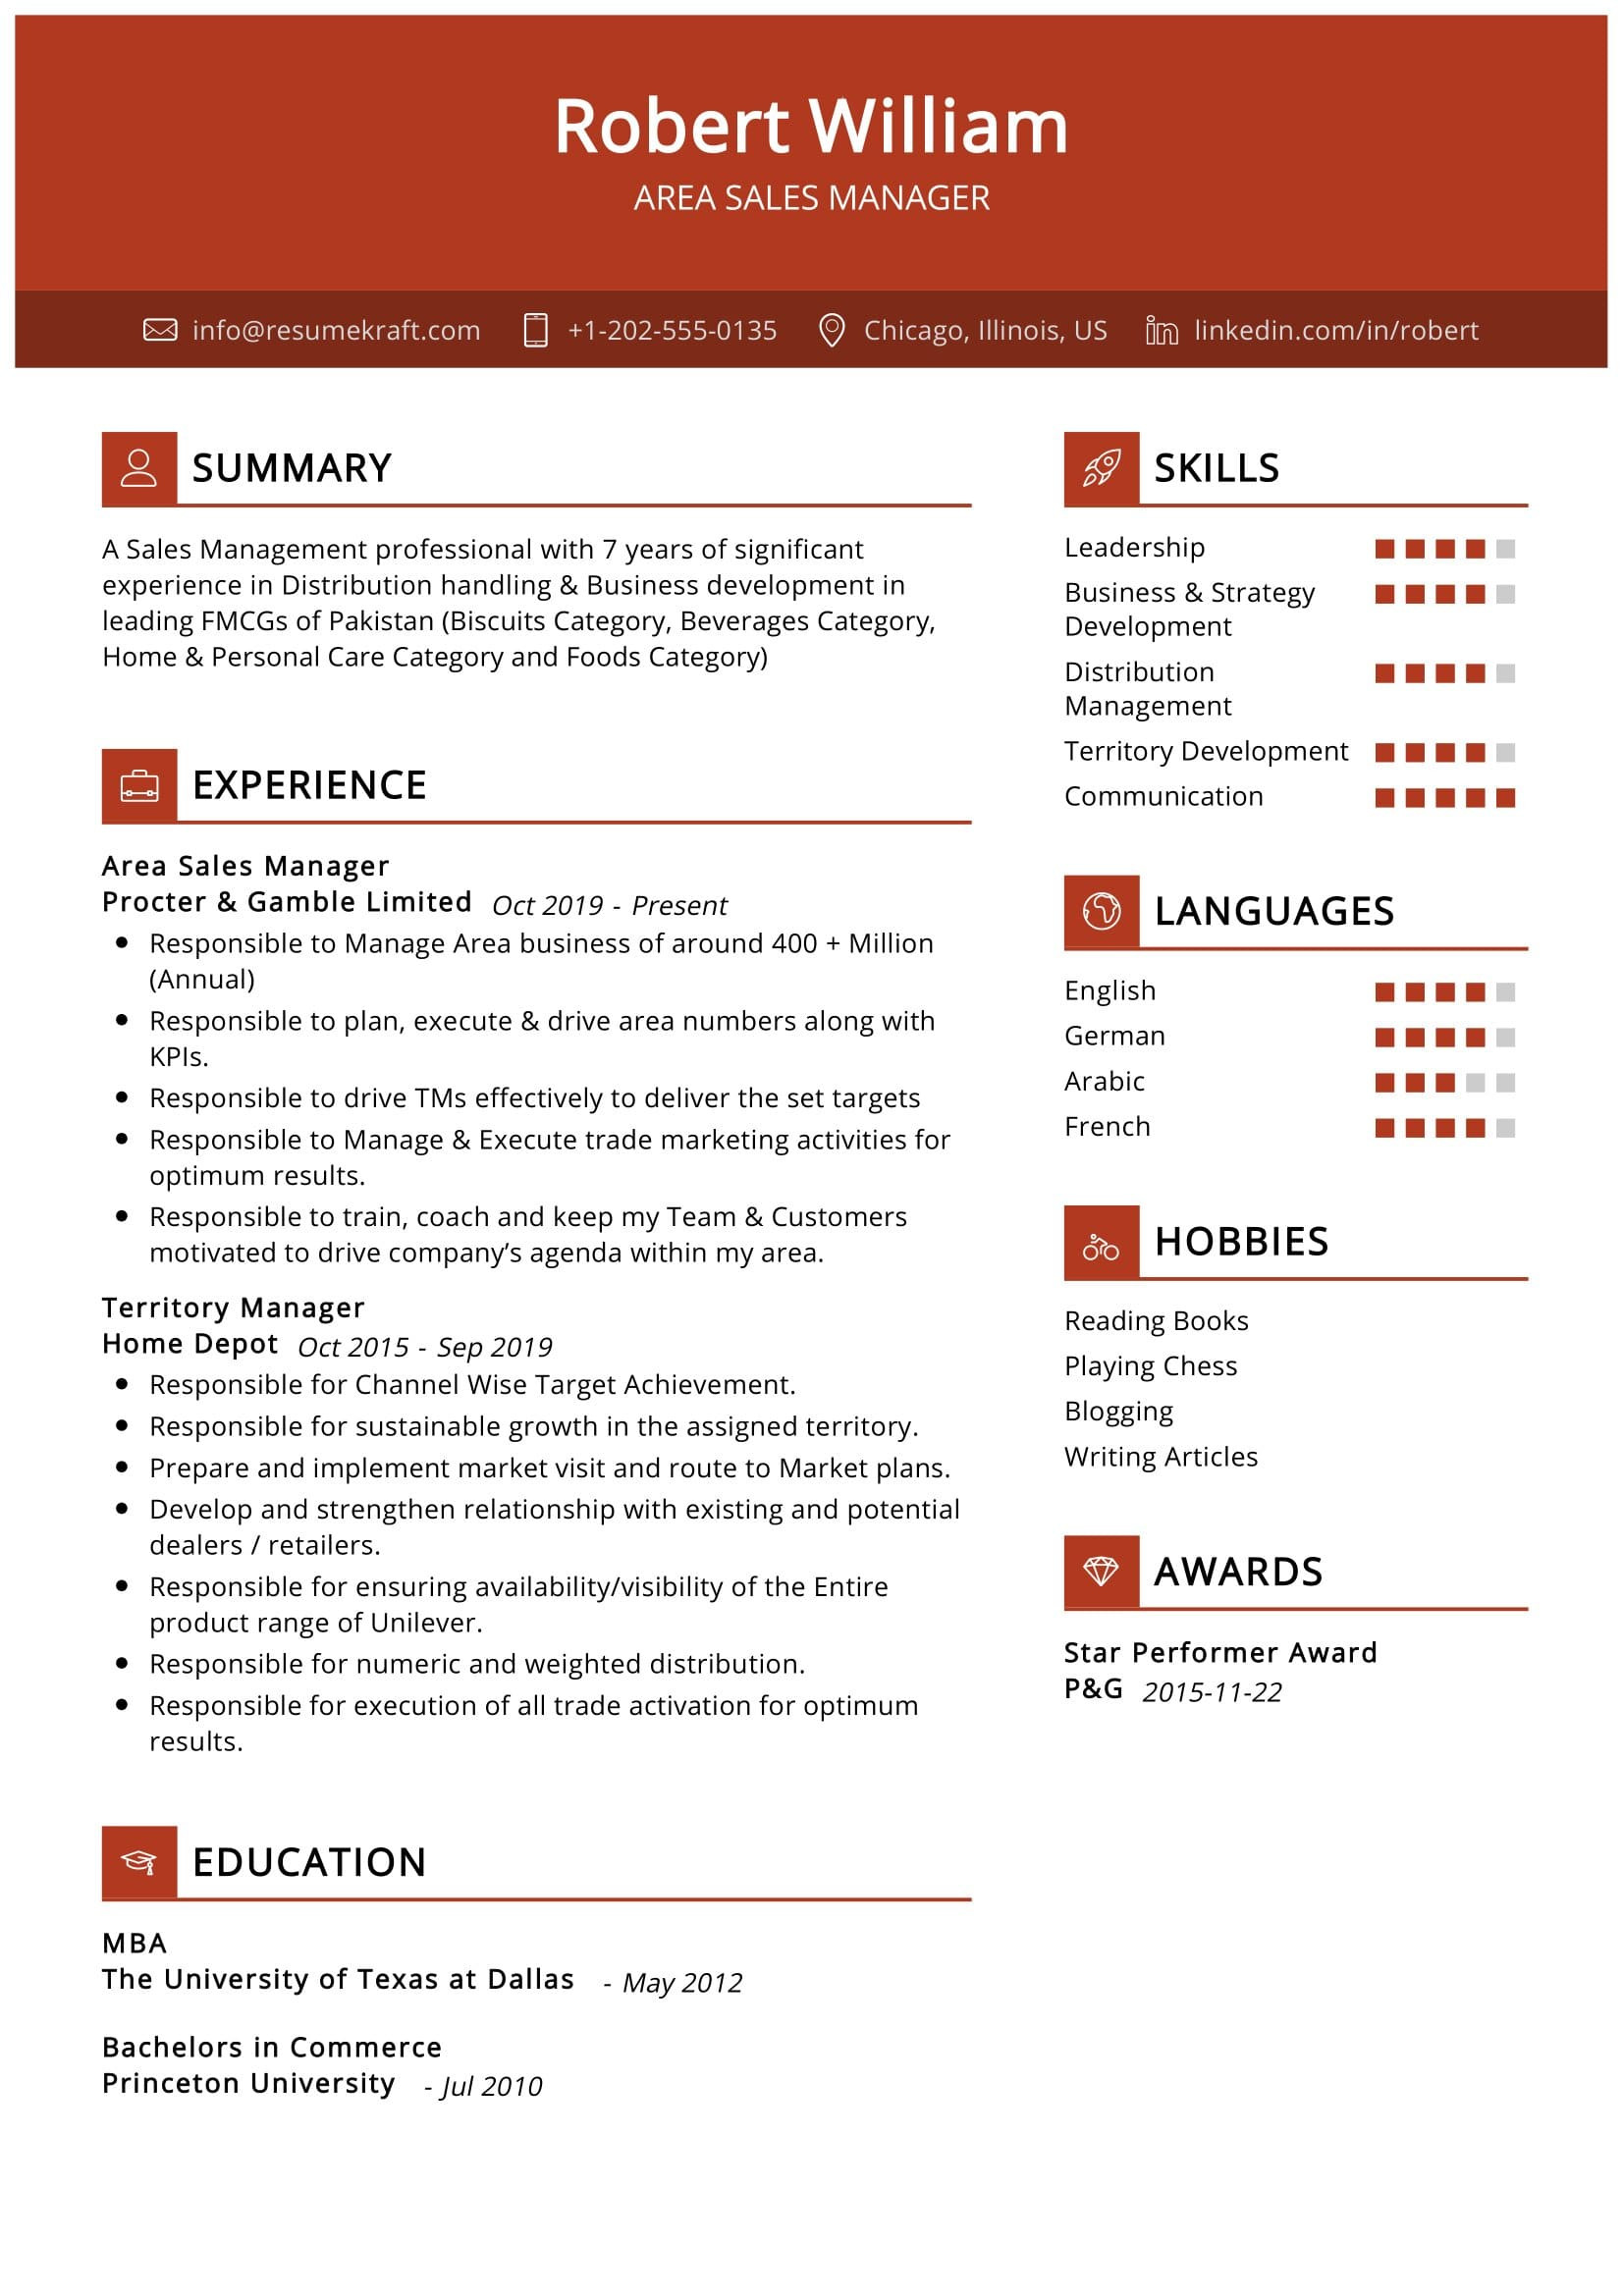 Sample Resume for A Sales Executive Procter and Gamble area Sales Manager Resume Sample 2022 Writing Tips – Resumekraft